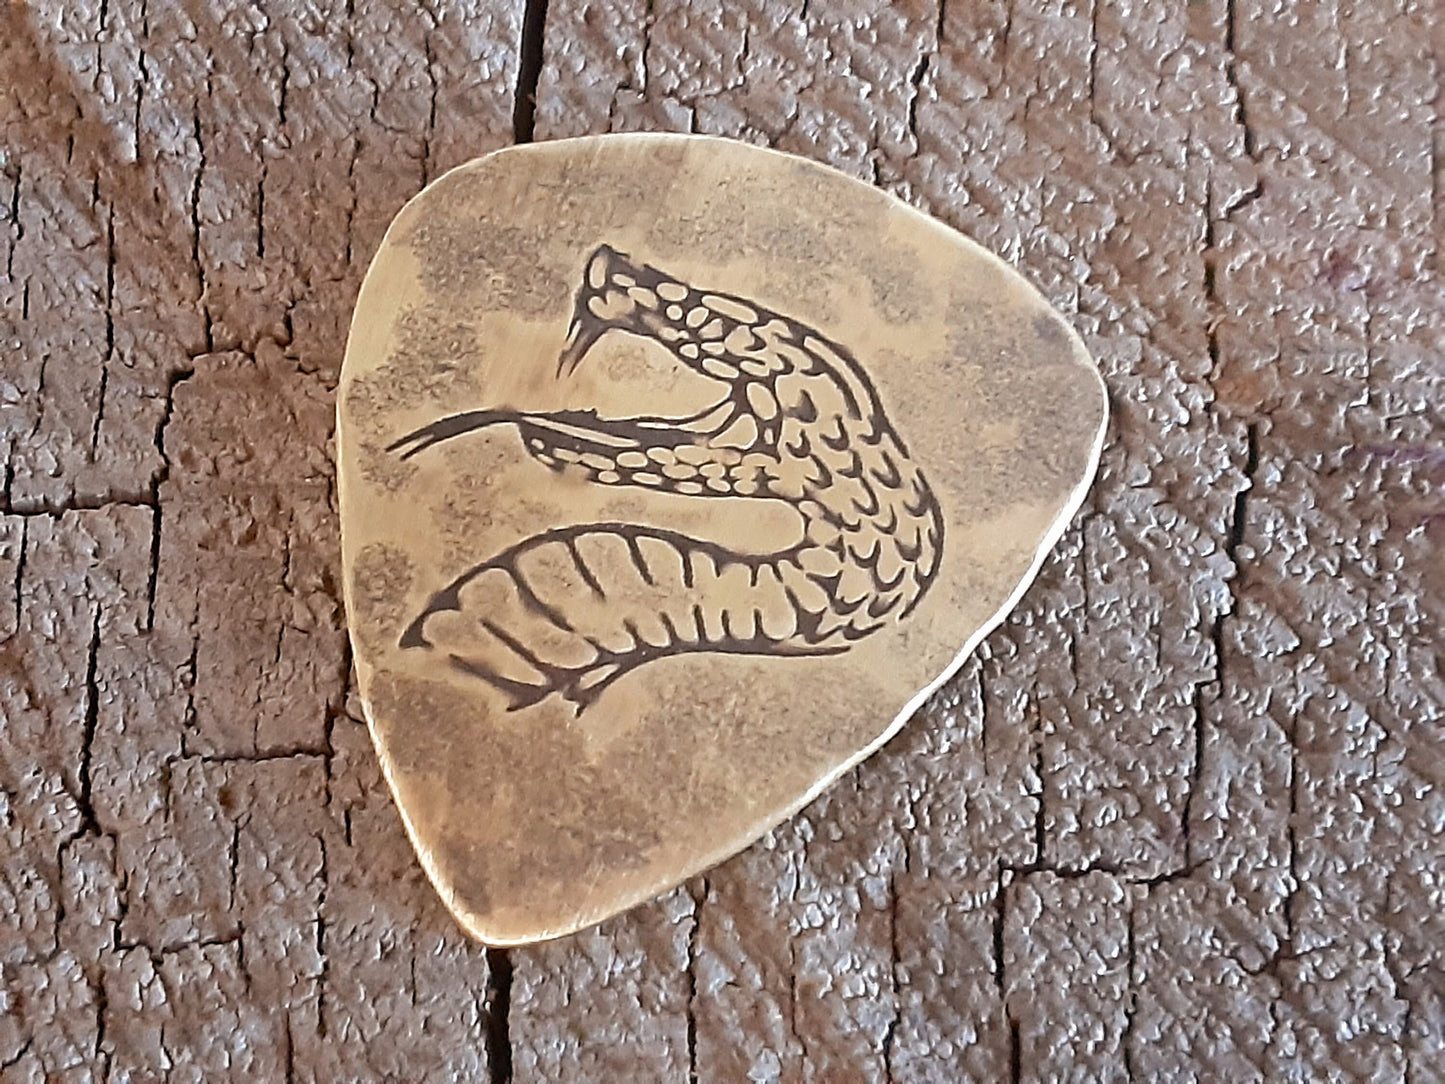 brass guitar pick - playable with snake head